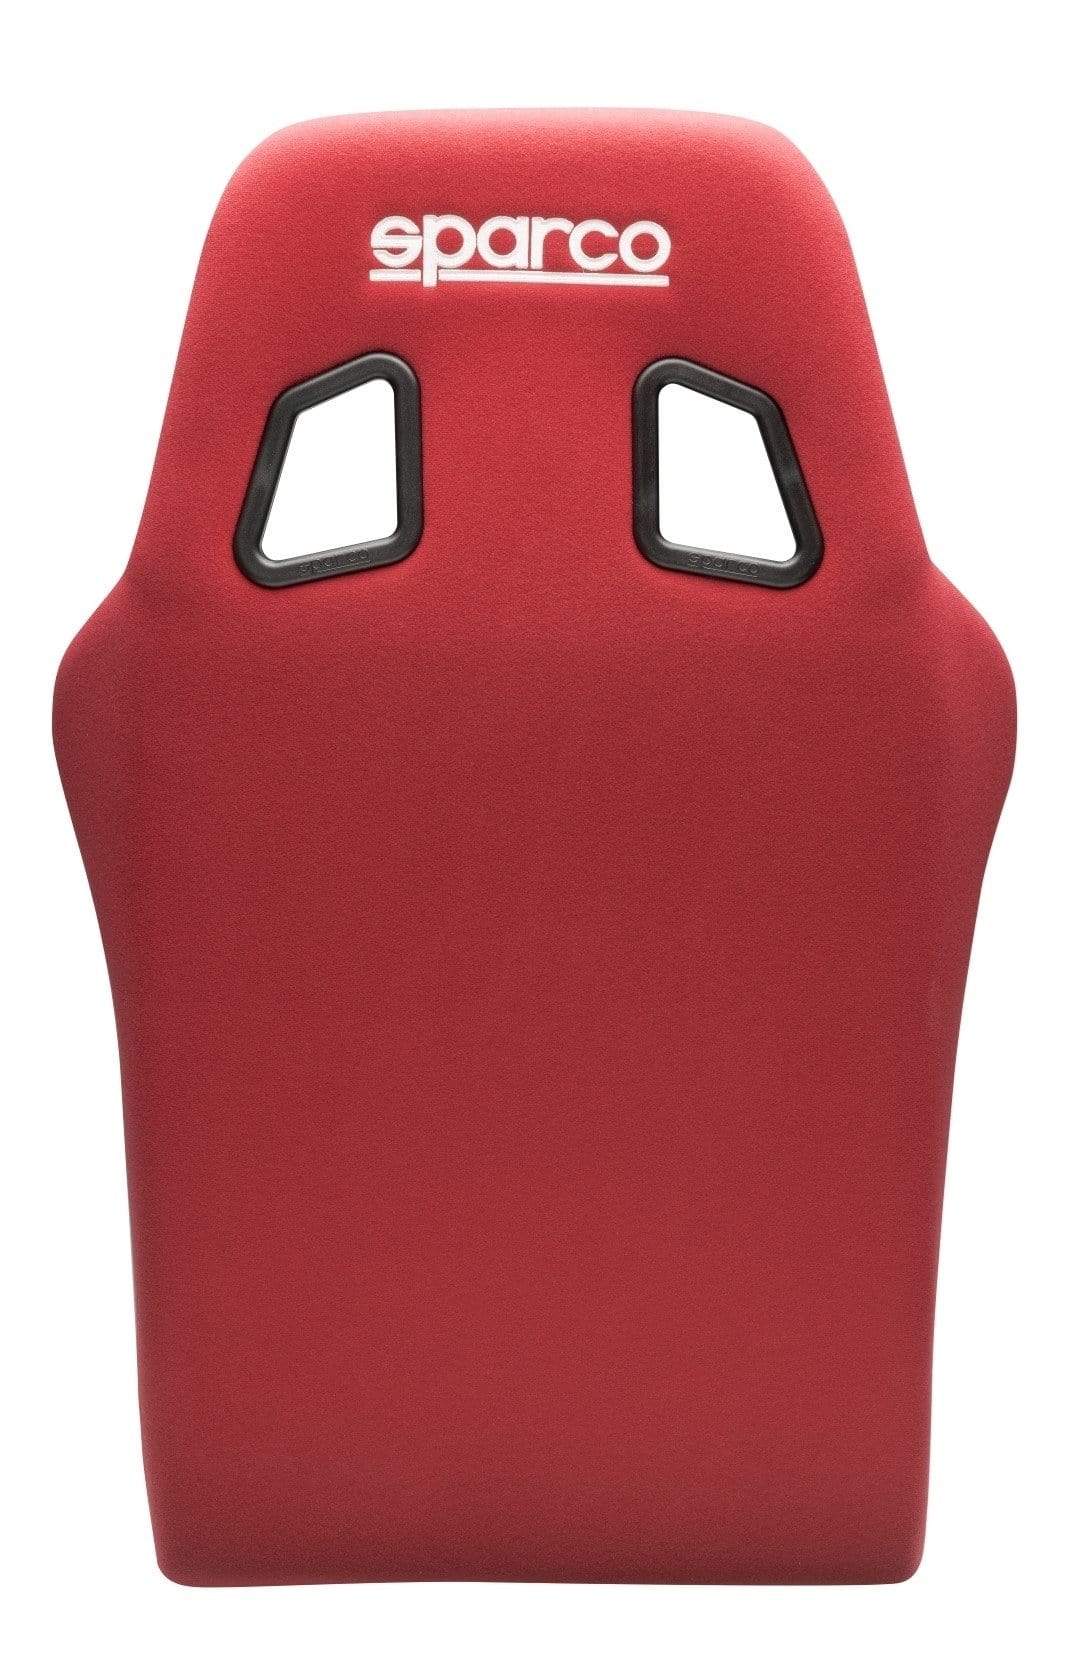 Sparco Sprint Seat (Large) Red - Universal - Dirty Racing Products